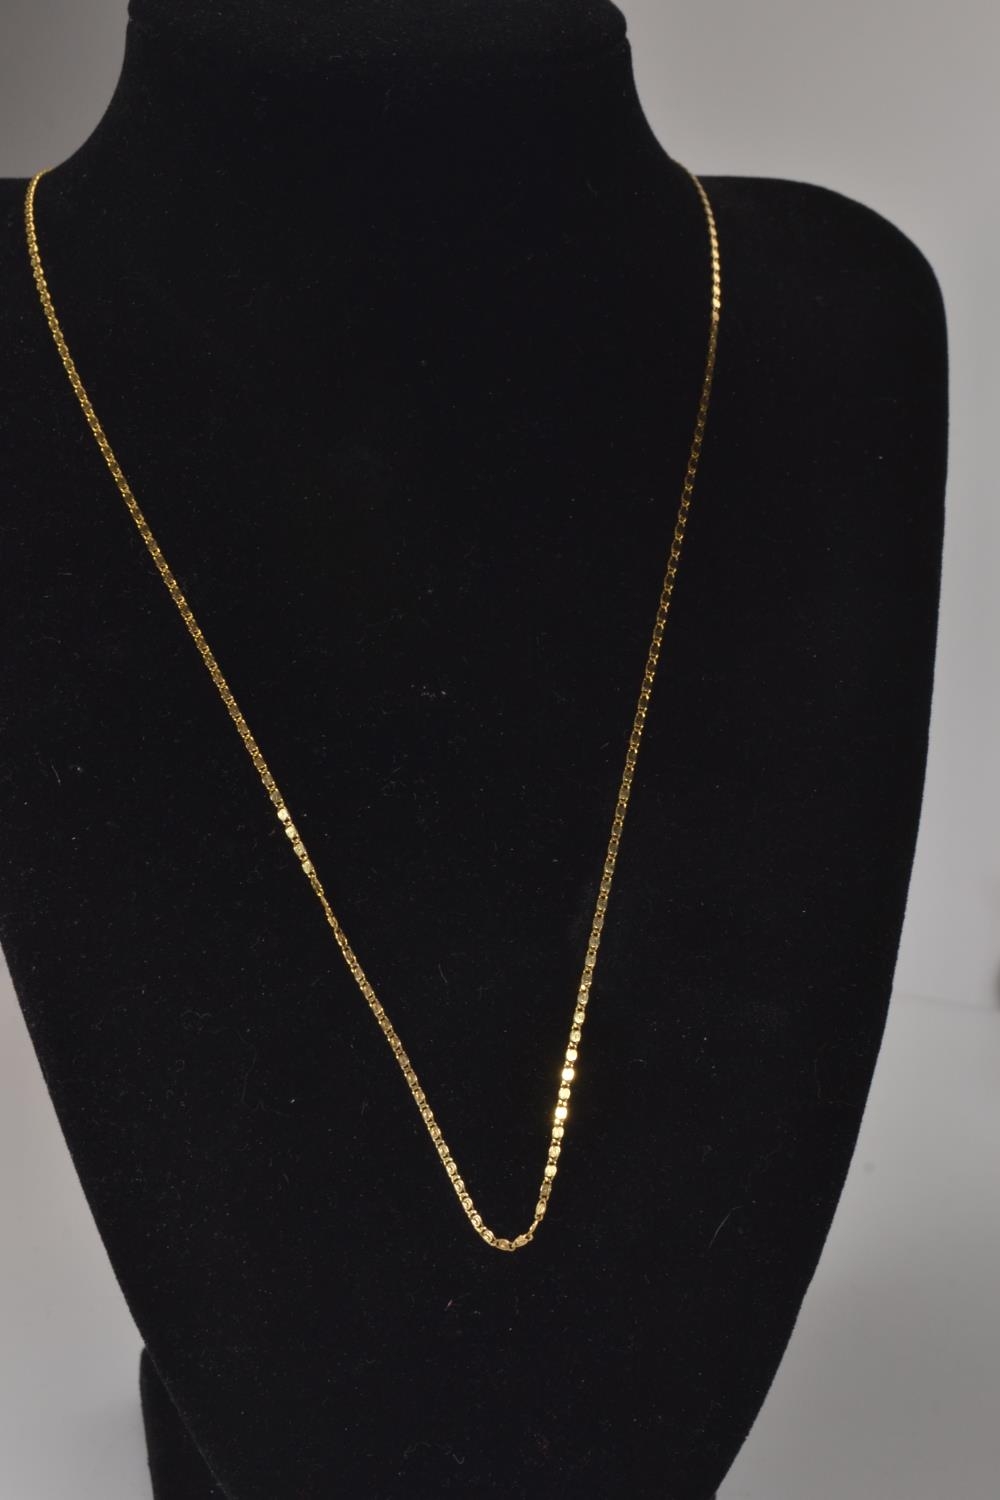 14ct gold scroll link neck chain, circumference 545mm, 2.6 grams  - Image 2 of 3